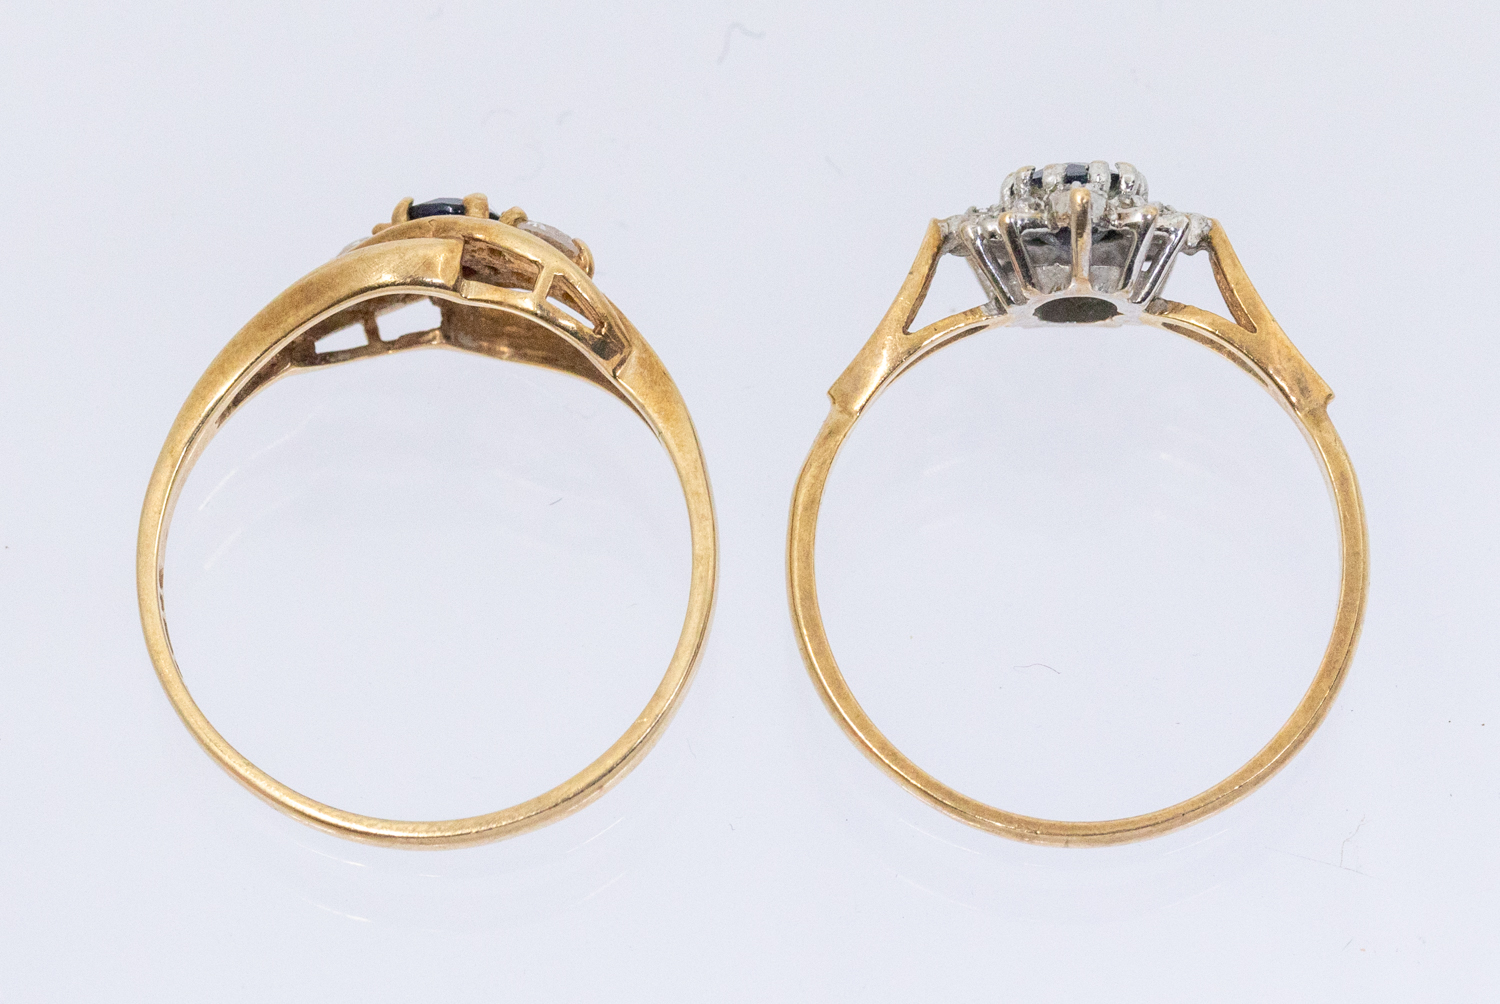 A cz and sapphire 9ct gold three stone ring, size N, along with a diamond and sapphire 9ct gold - Image 2 of 2